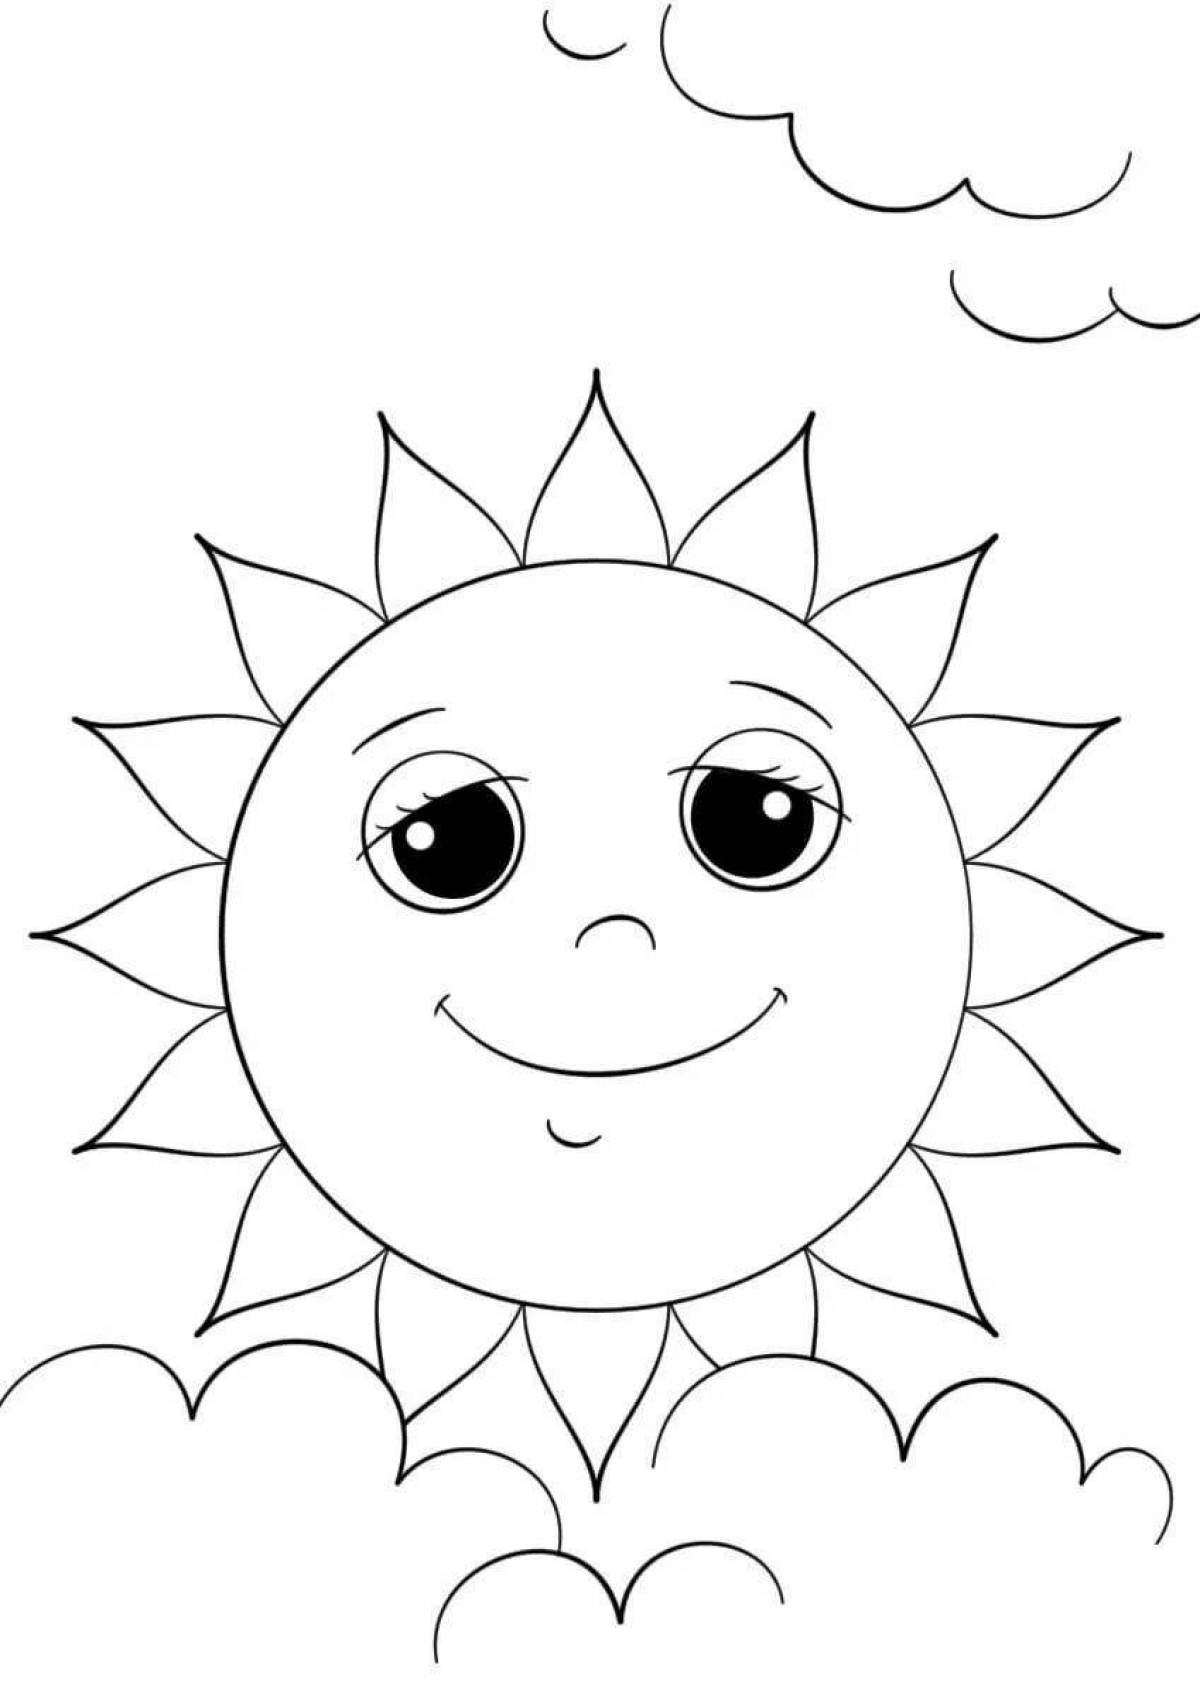 Peace coloring sunny picture for kids